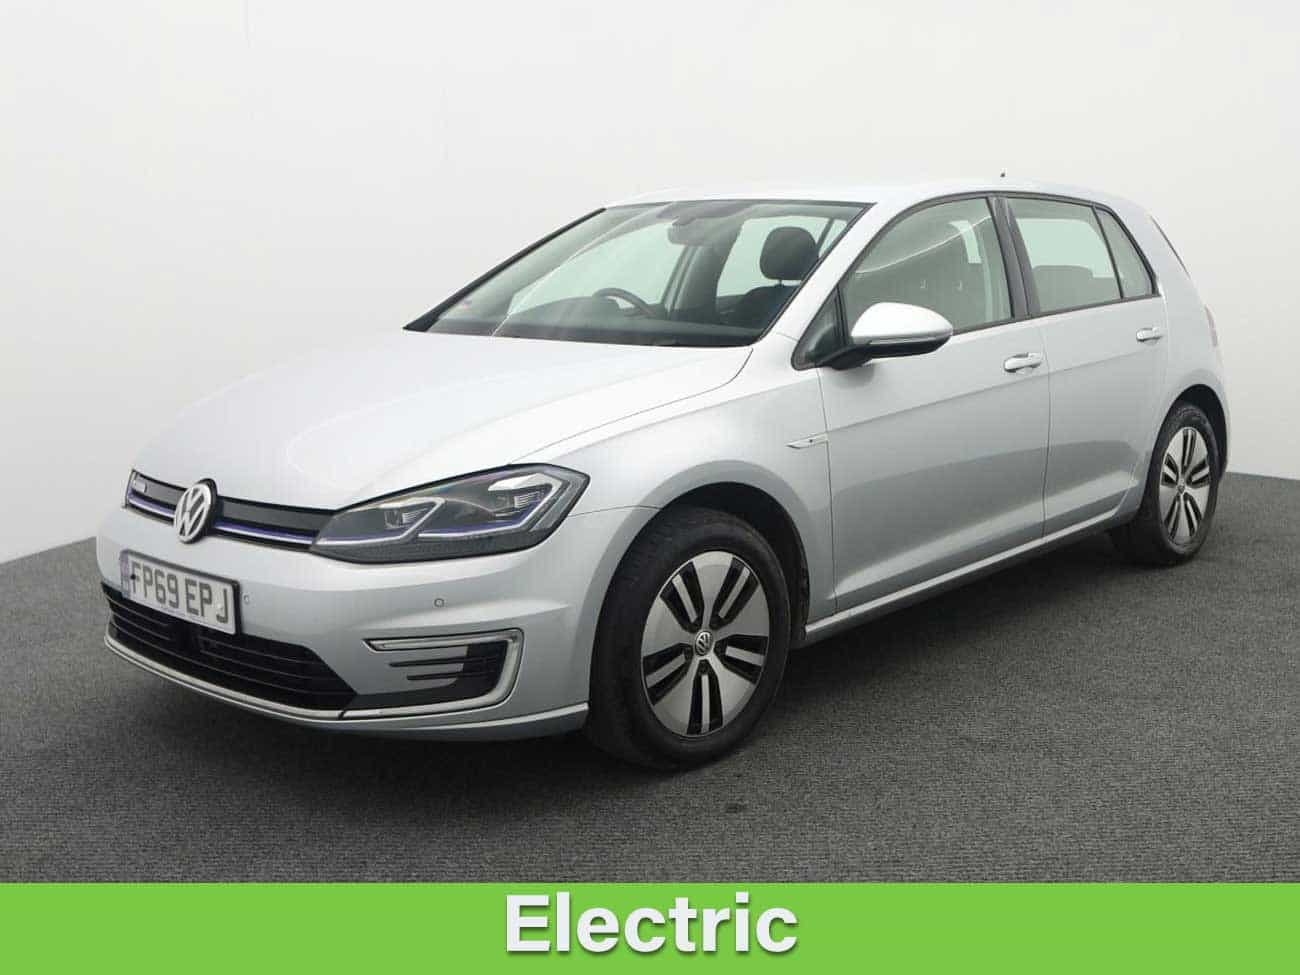 Used electric Volkswagen car